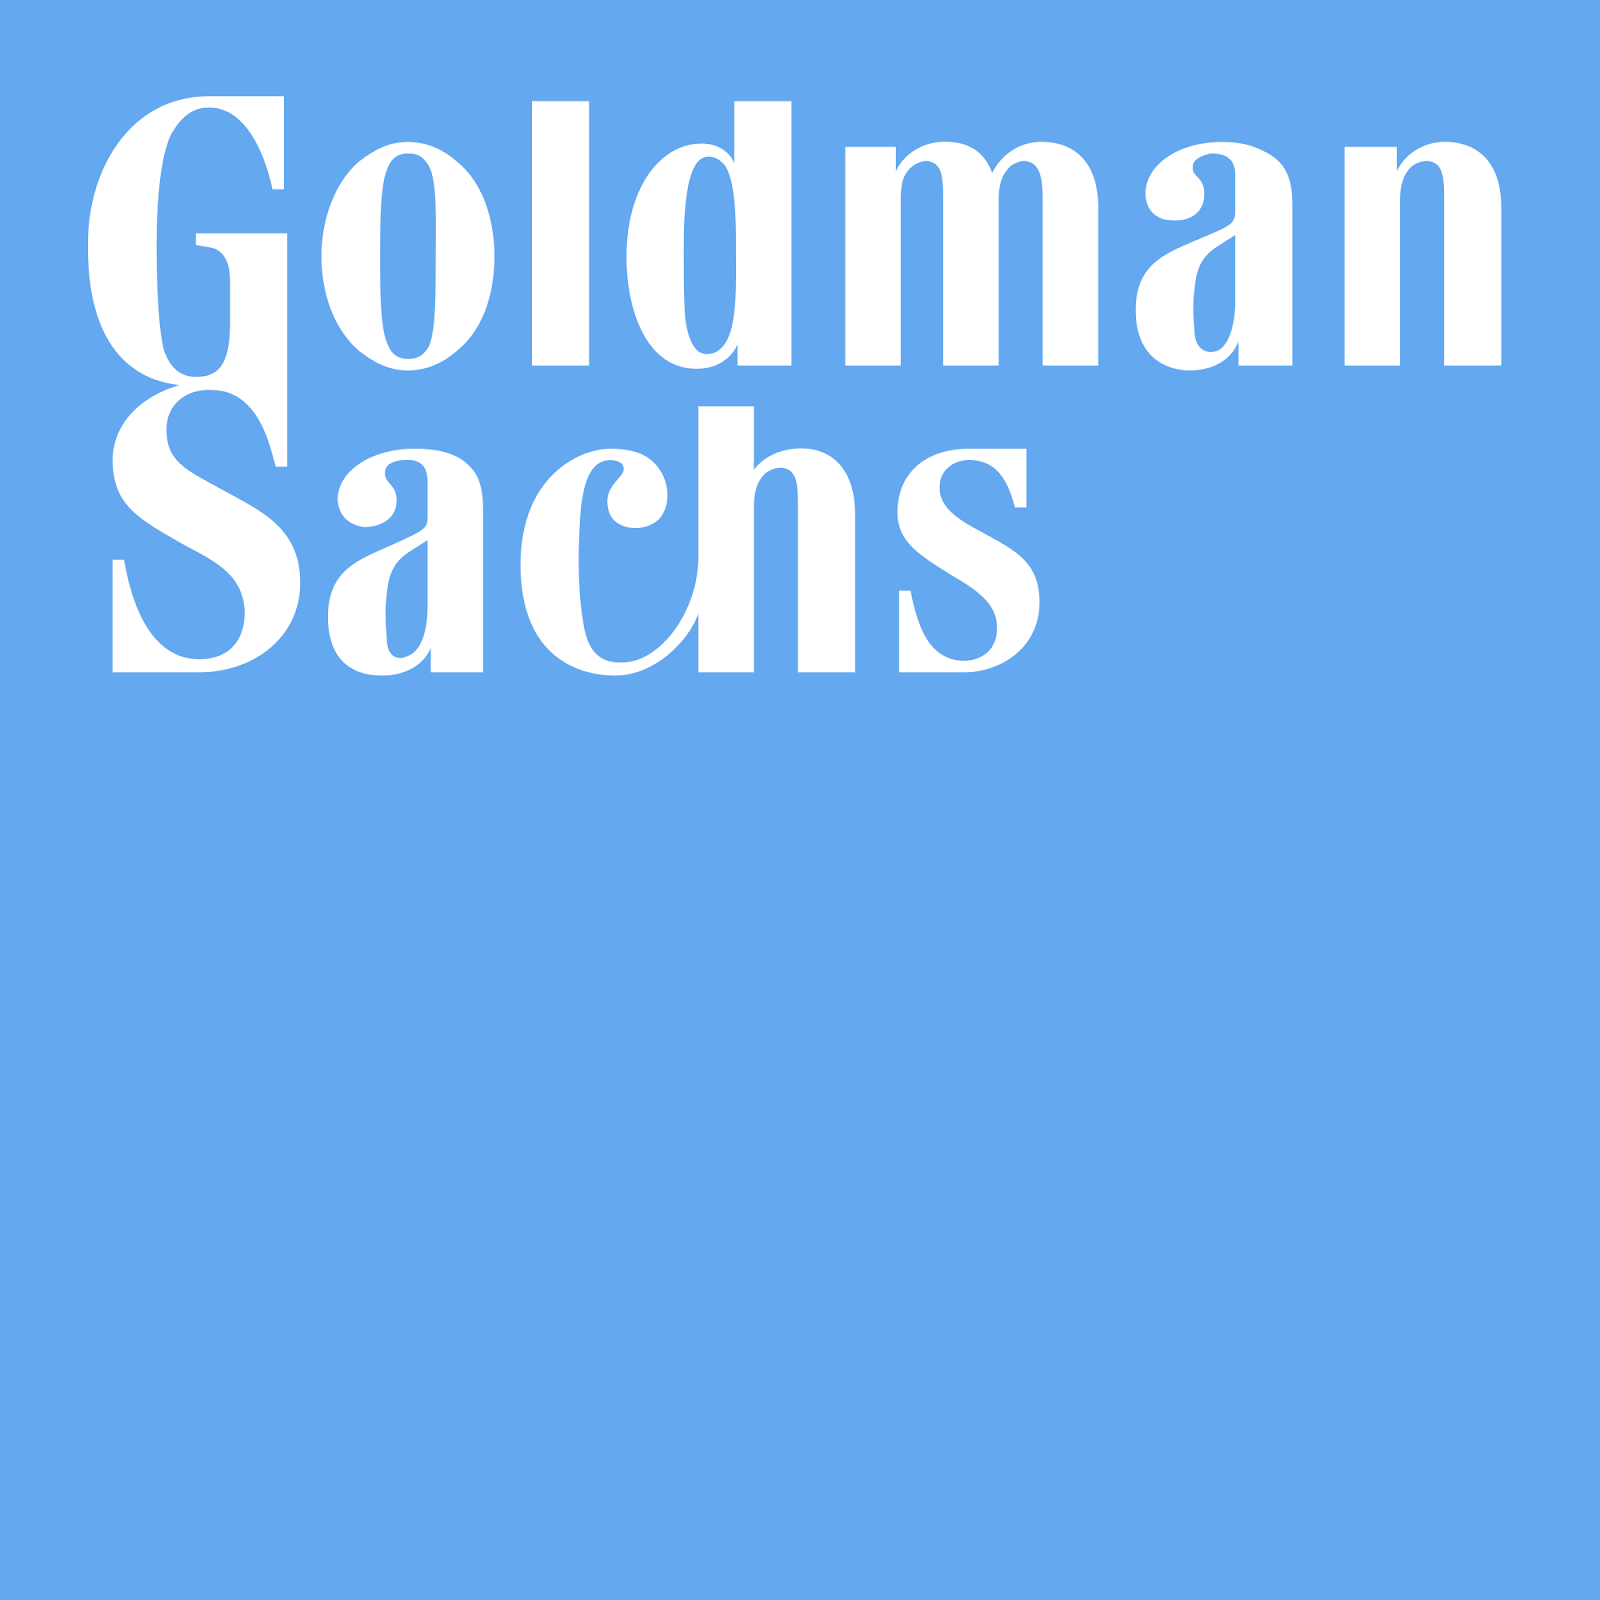 business-ethics-case-analyses-goldman-sachs-trust-issues-due-to